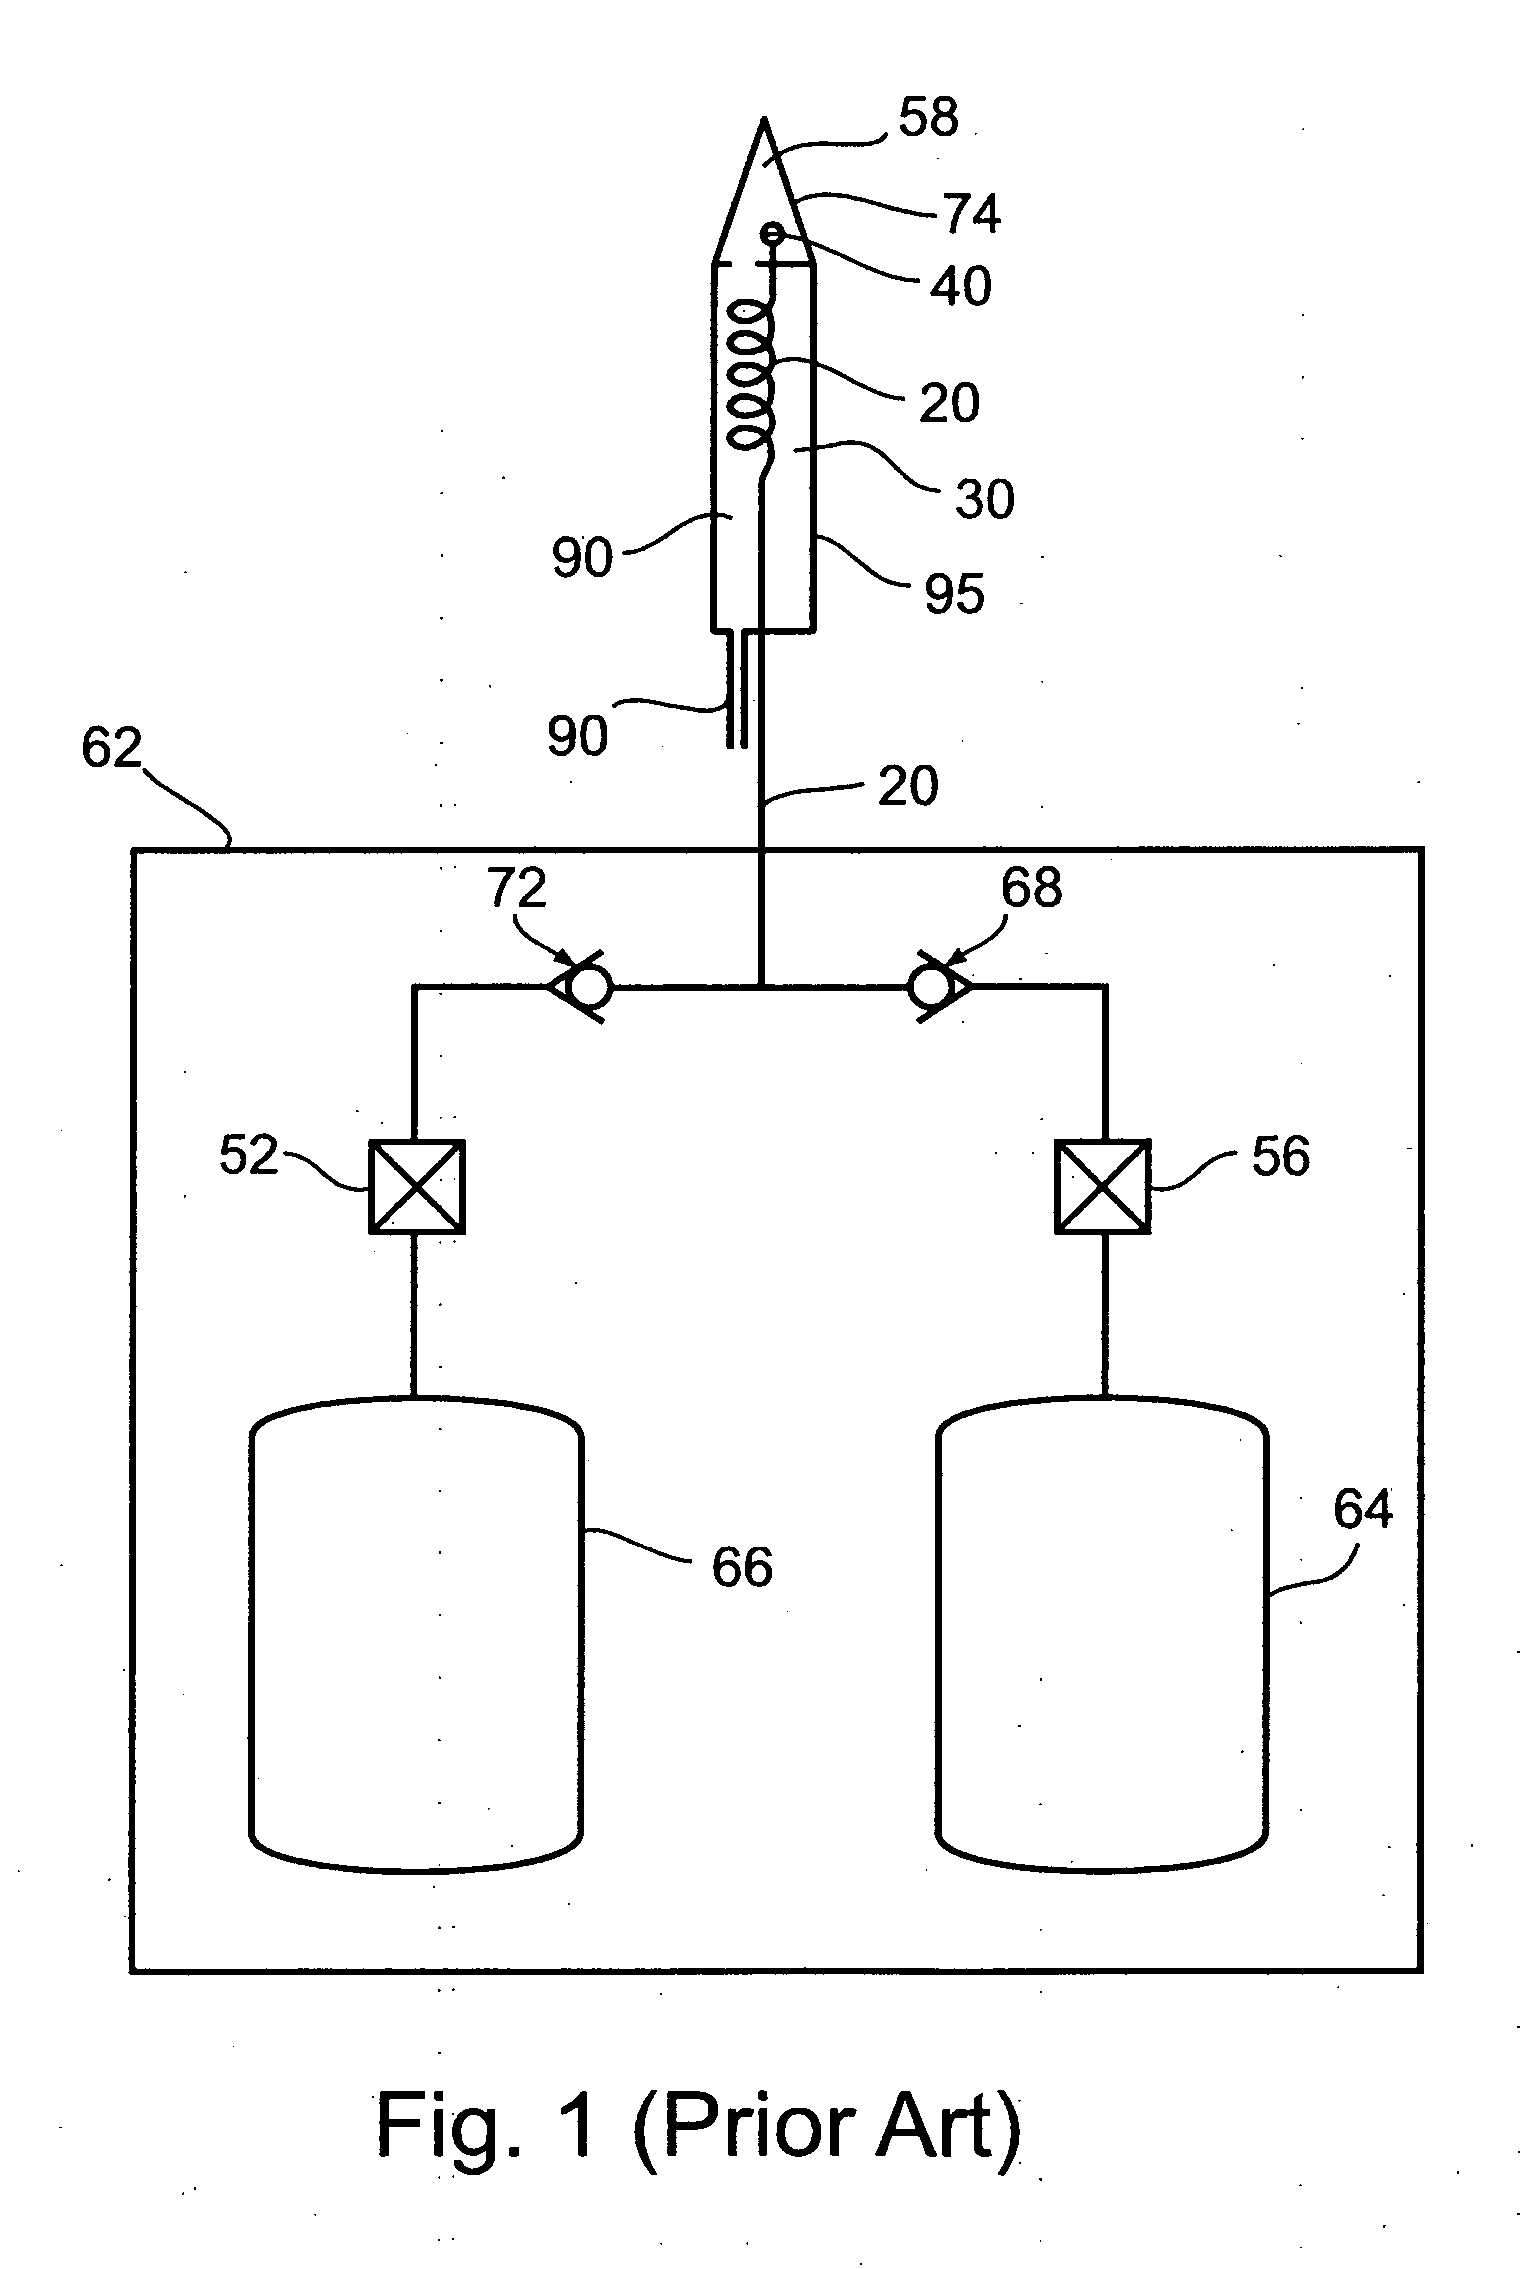 Gas-heated gas-cooled cryoprobe utilizing electrical heating and a single gas source